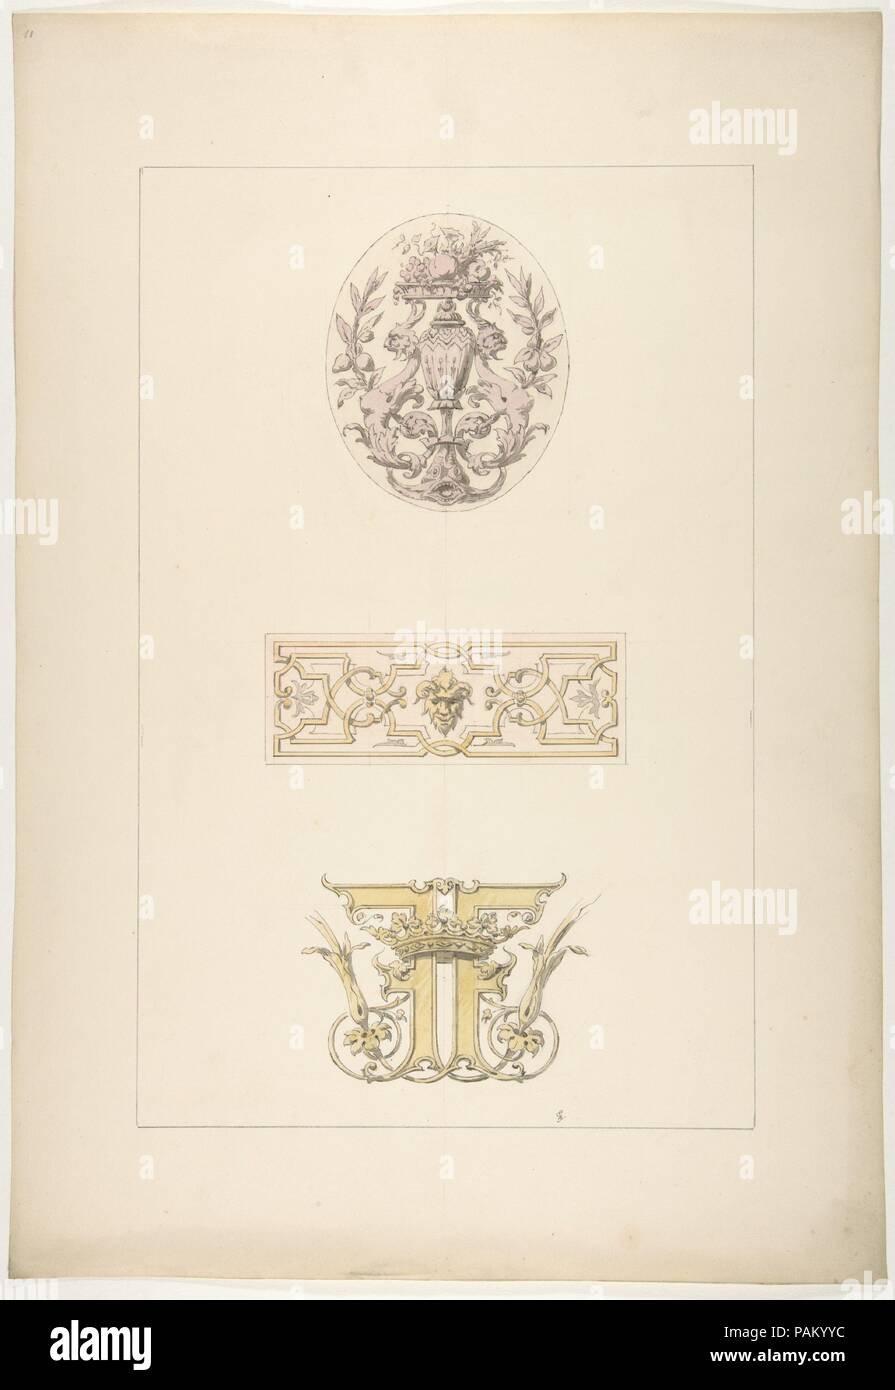 Two designs for decorative panels and one design for an ornamental monogram with a crown and the initials:  FF. Artist: Jules-Edmond-Charles Lachaise (French, died 1897); Eugène-Pierre Gourdet (French, born Paris, 1820-1889). Dimensions: sheet: 19 1/2 x 13 3/8 in. (49.5 x 33.9 cm). Date: 1830-97. Museum: Metropolitan Museum of Art, New York, USA. Stock Photo